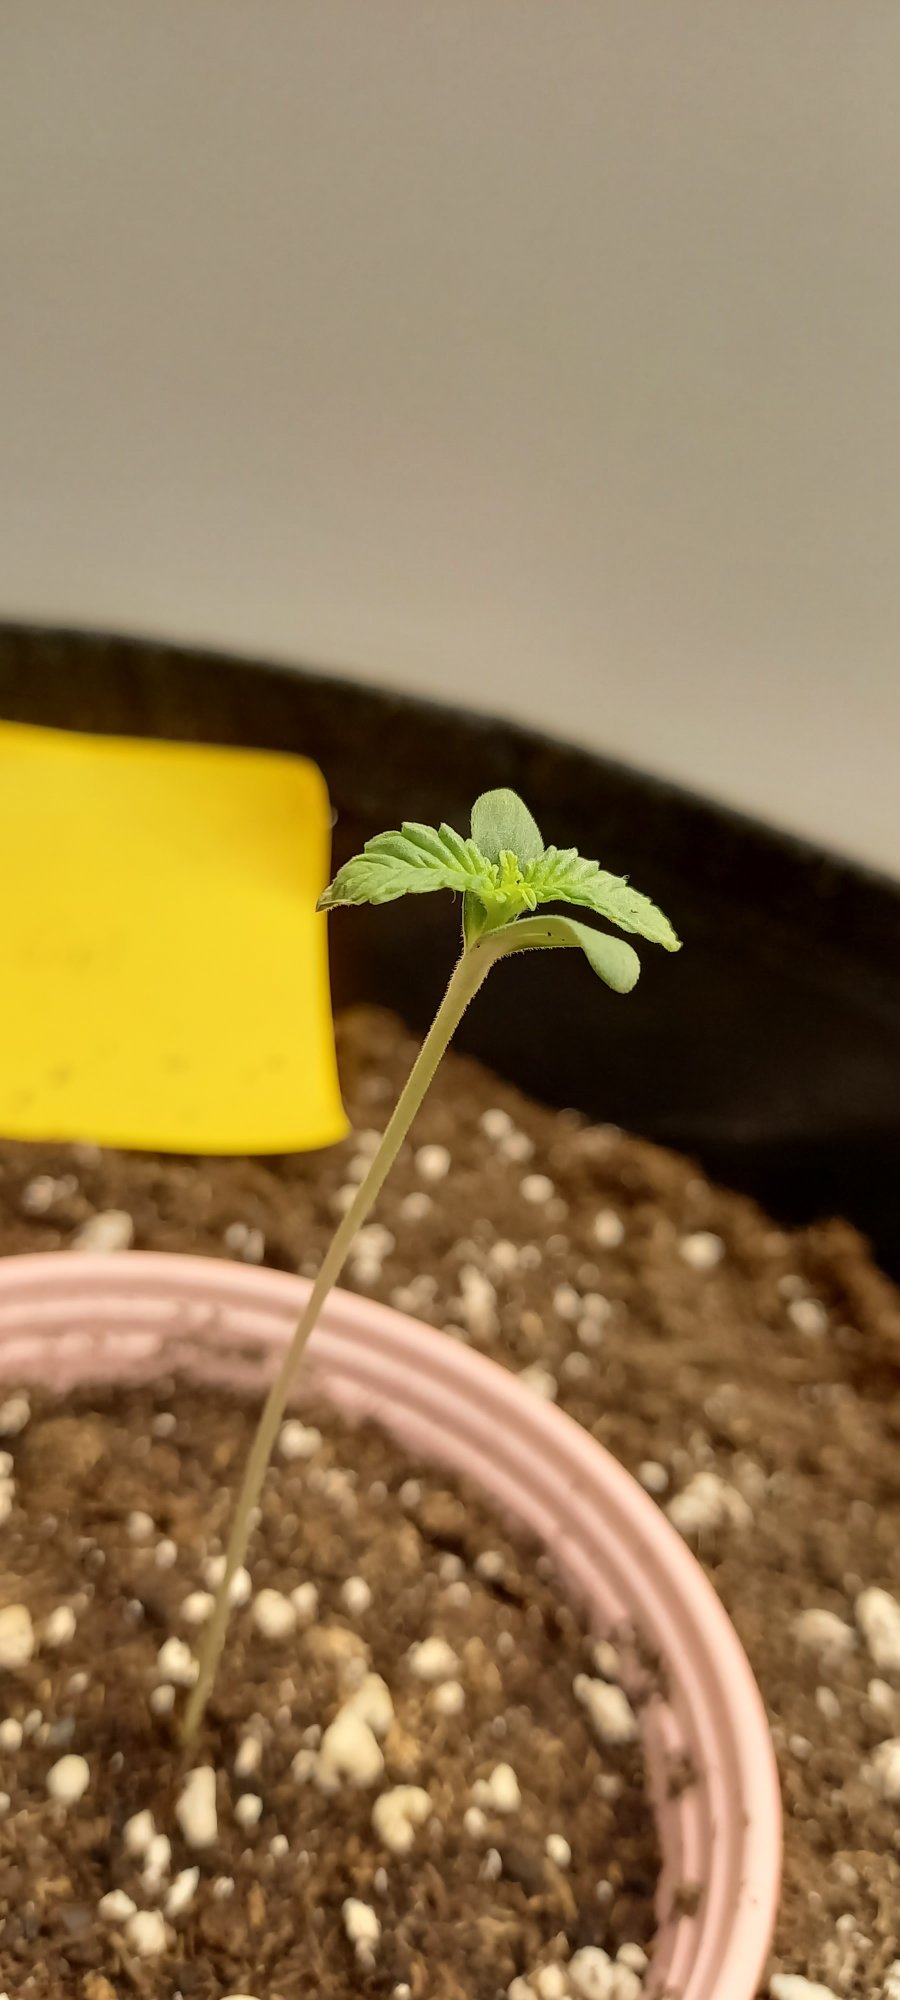 Seedling is stretching with burnt tips 2